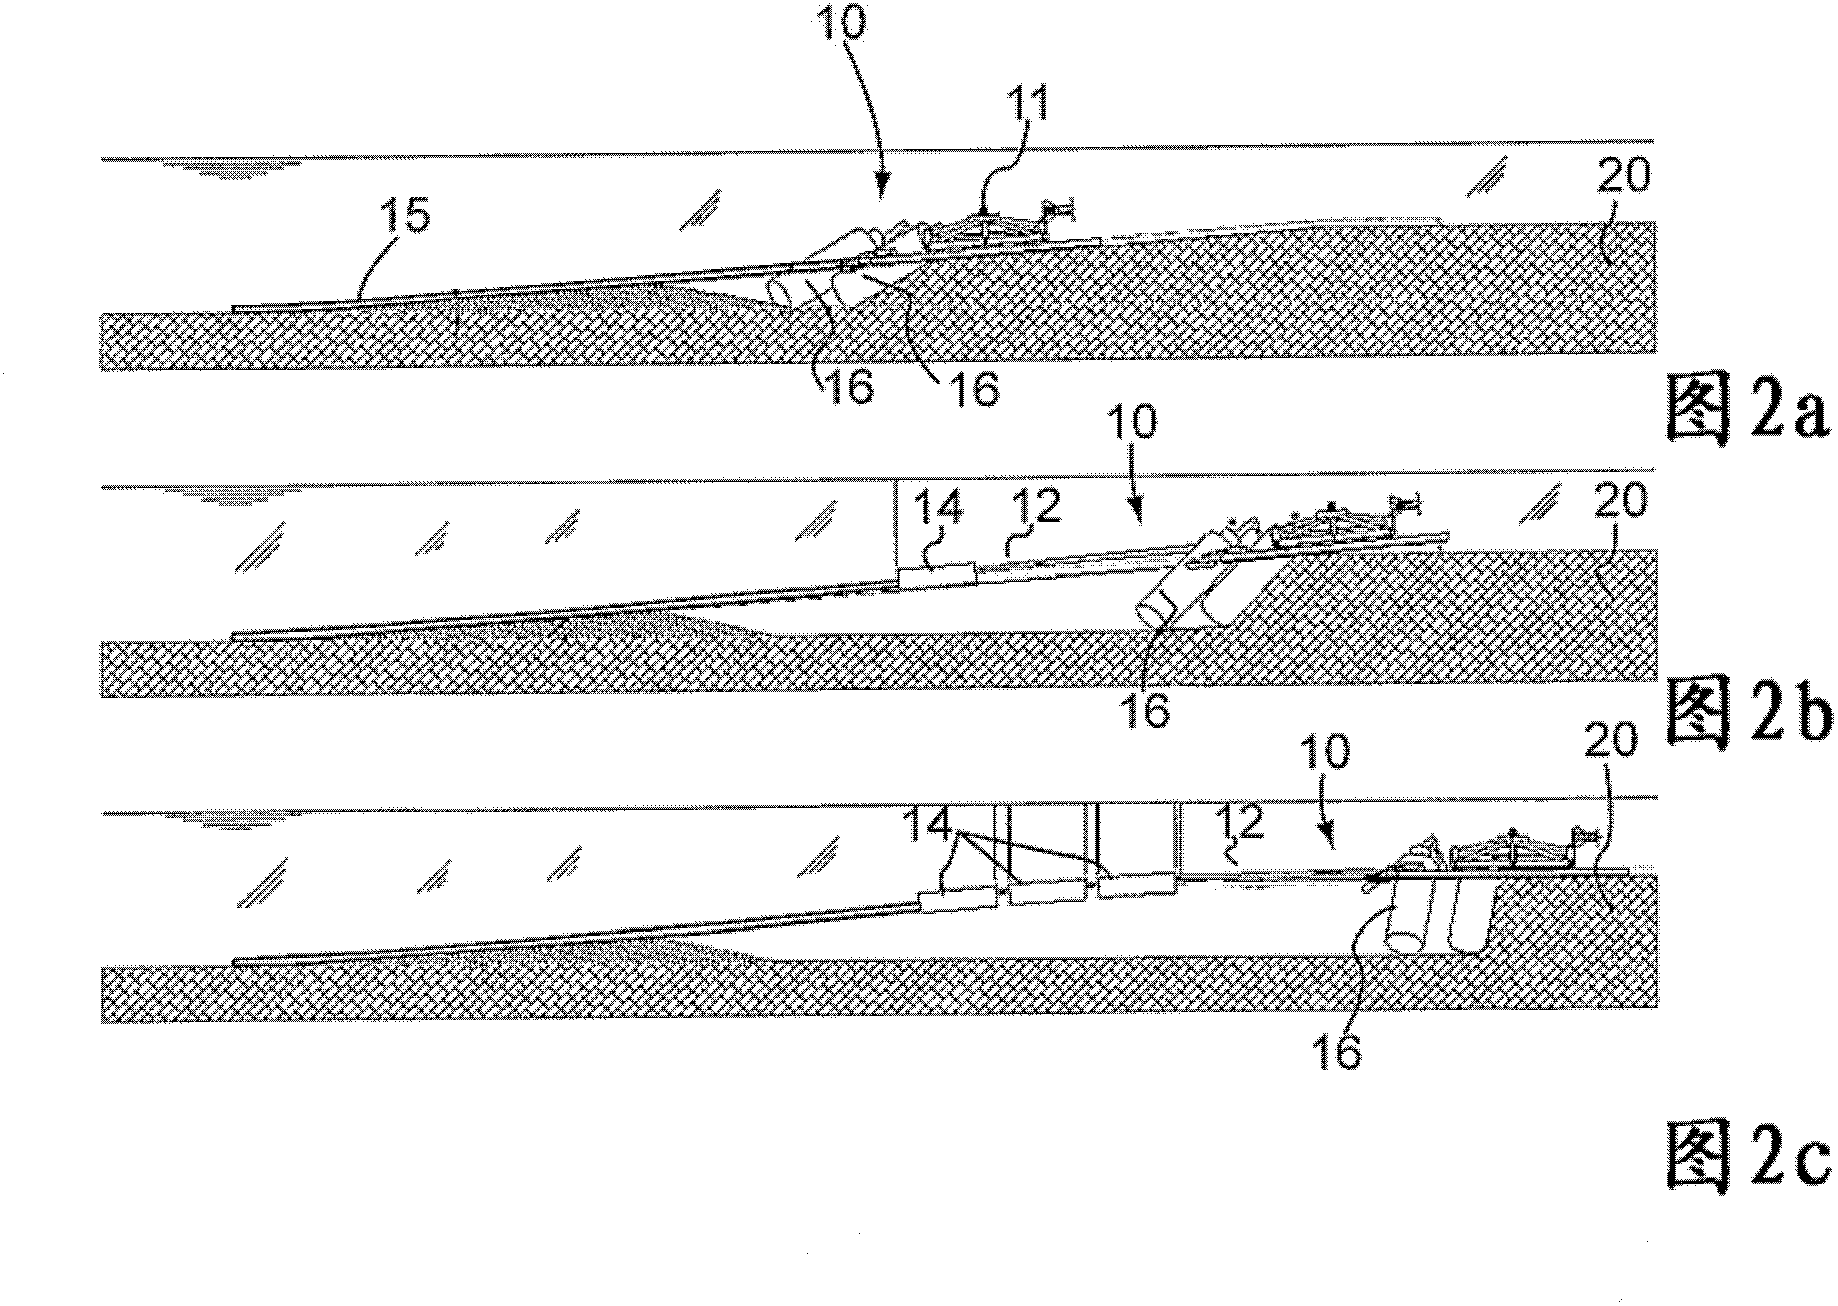 Group and method for laying and burying pipelines at the seafloor